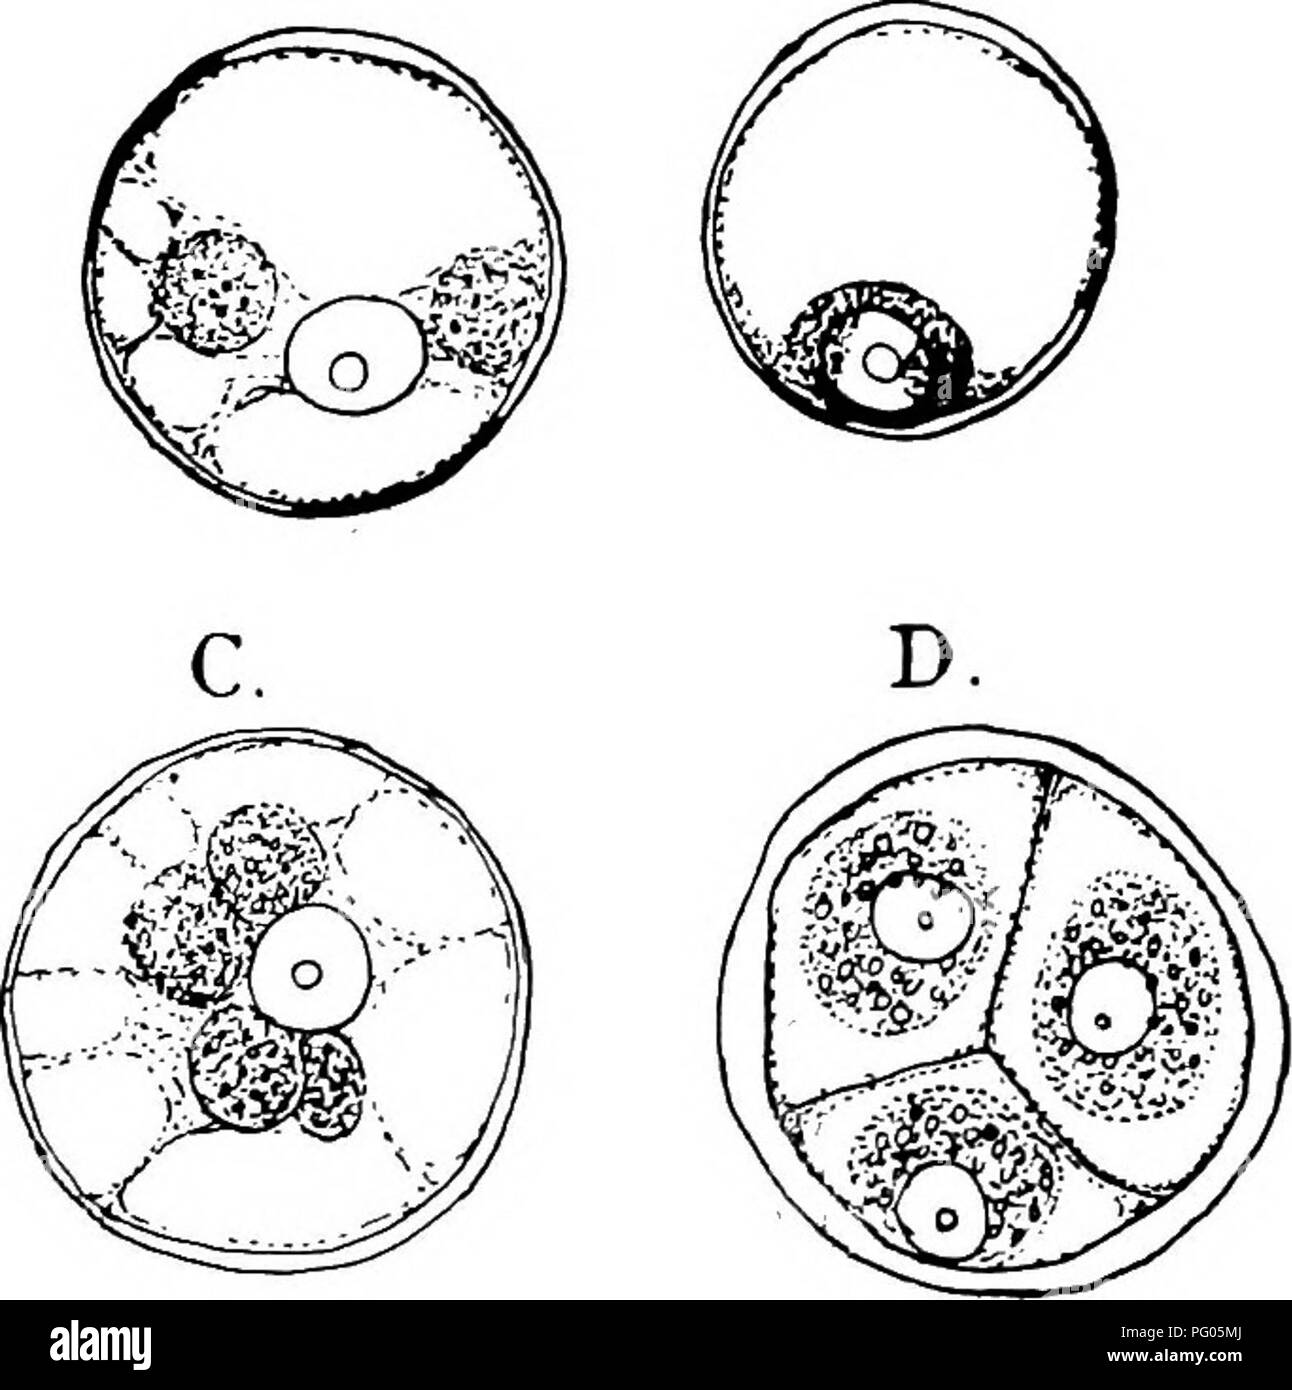 . The structure and development of mosses and ferns (Archegoniatae). Plant morphology; Mosses; Ferns. IV. THE ANTHOCEROTES 141 simultaneously between the four nuclei dividing the mother cell into four tetrahedral cells,âthe young spores. The wall of the mother cell becomes thicker, and in the later stages swells up on being placed in water, so that it interferes a good deal with the study of the spores in the fresh condition. As the spores ripen they develop a thick exospore, which is yellow in colour and irregularly thickened in A. Pearsoni, and in A. fusiformis black and covered with small t Stock Photo